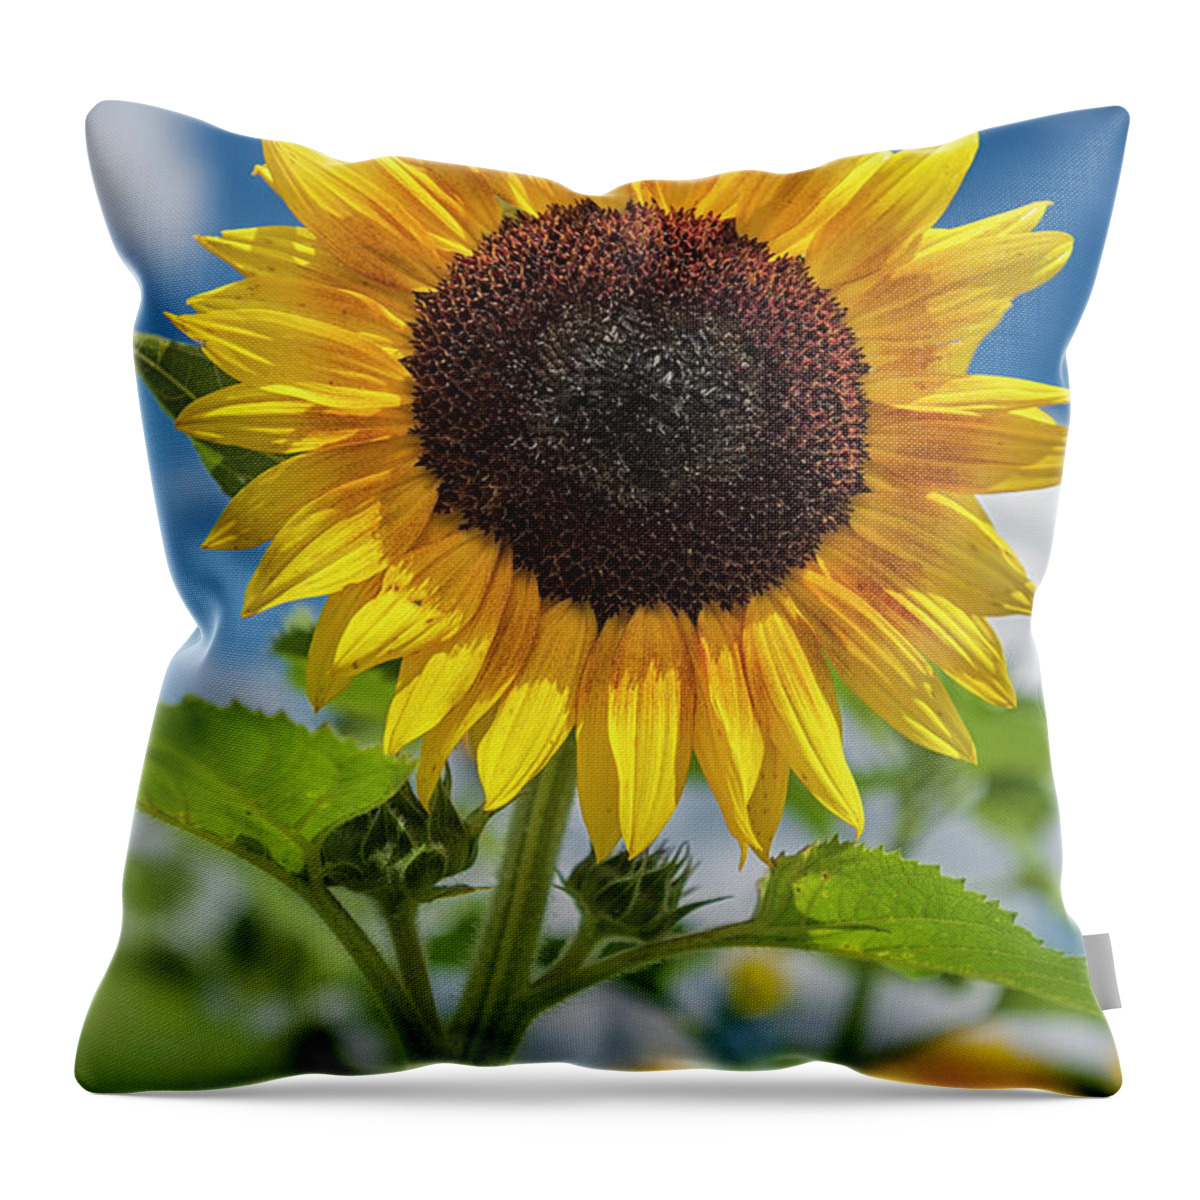 Maryland Throw Pillow featuring the painting Summer Arrival 2 by Robert Fawcett